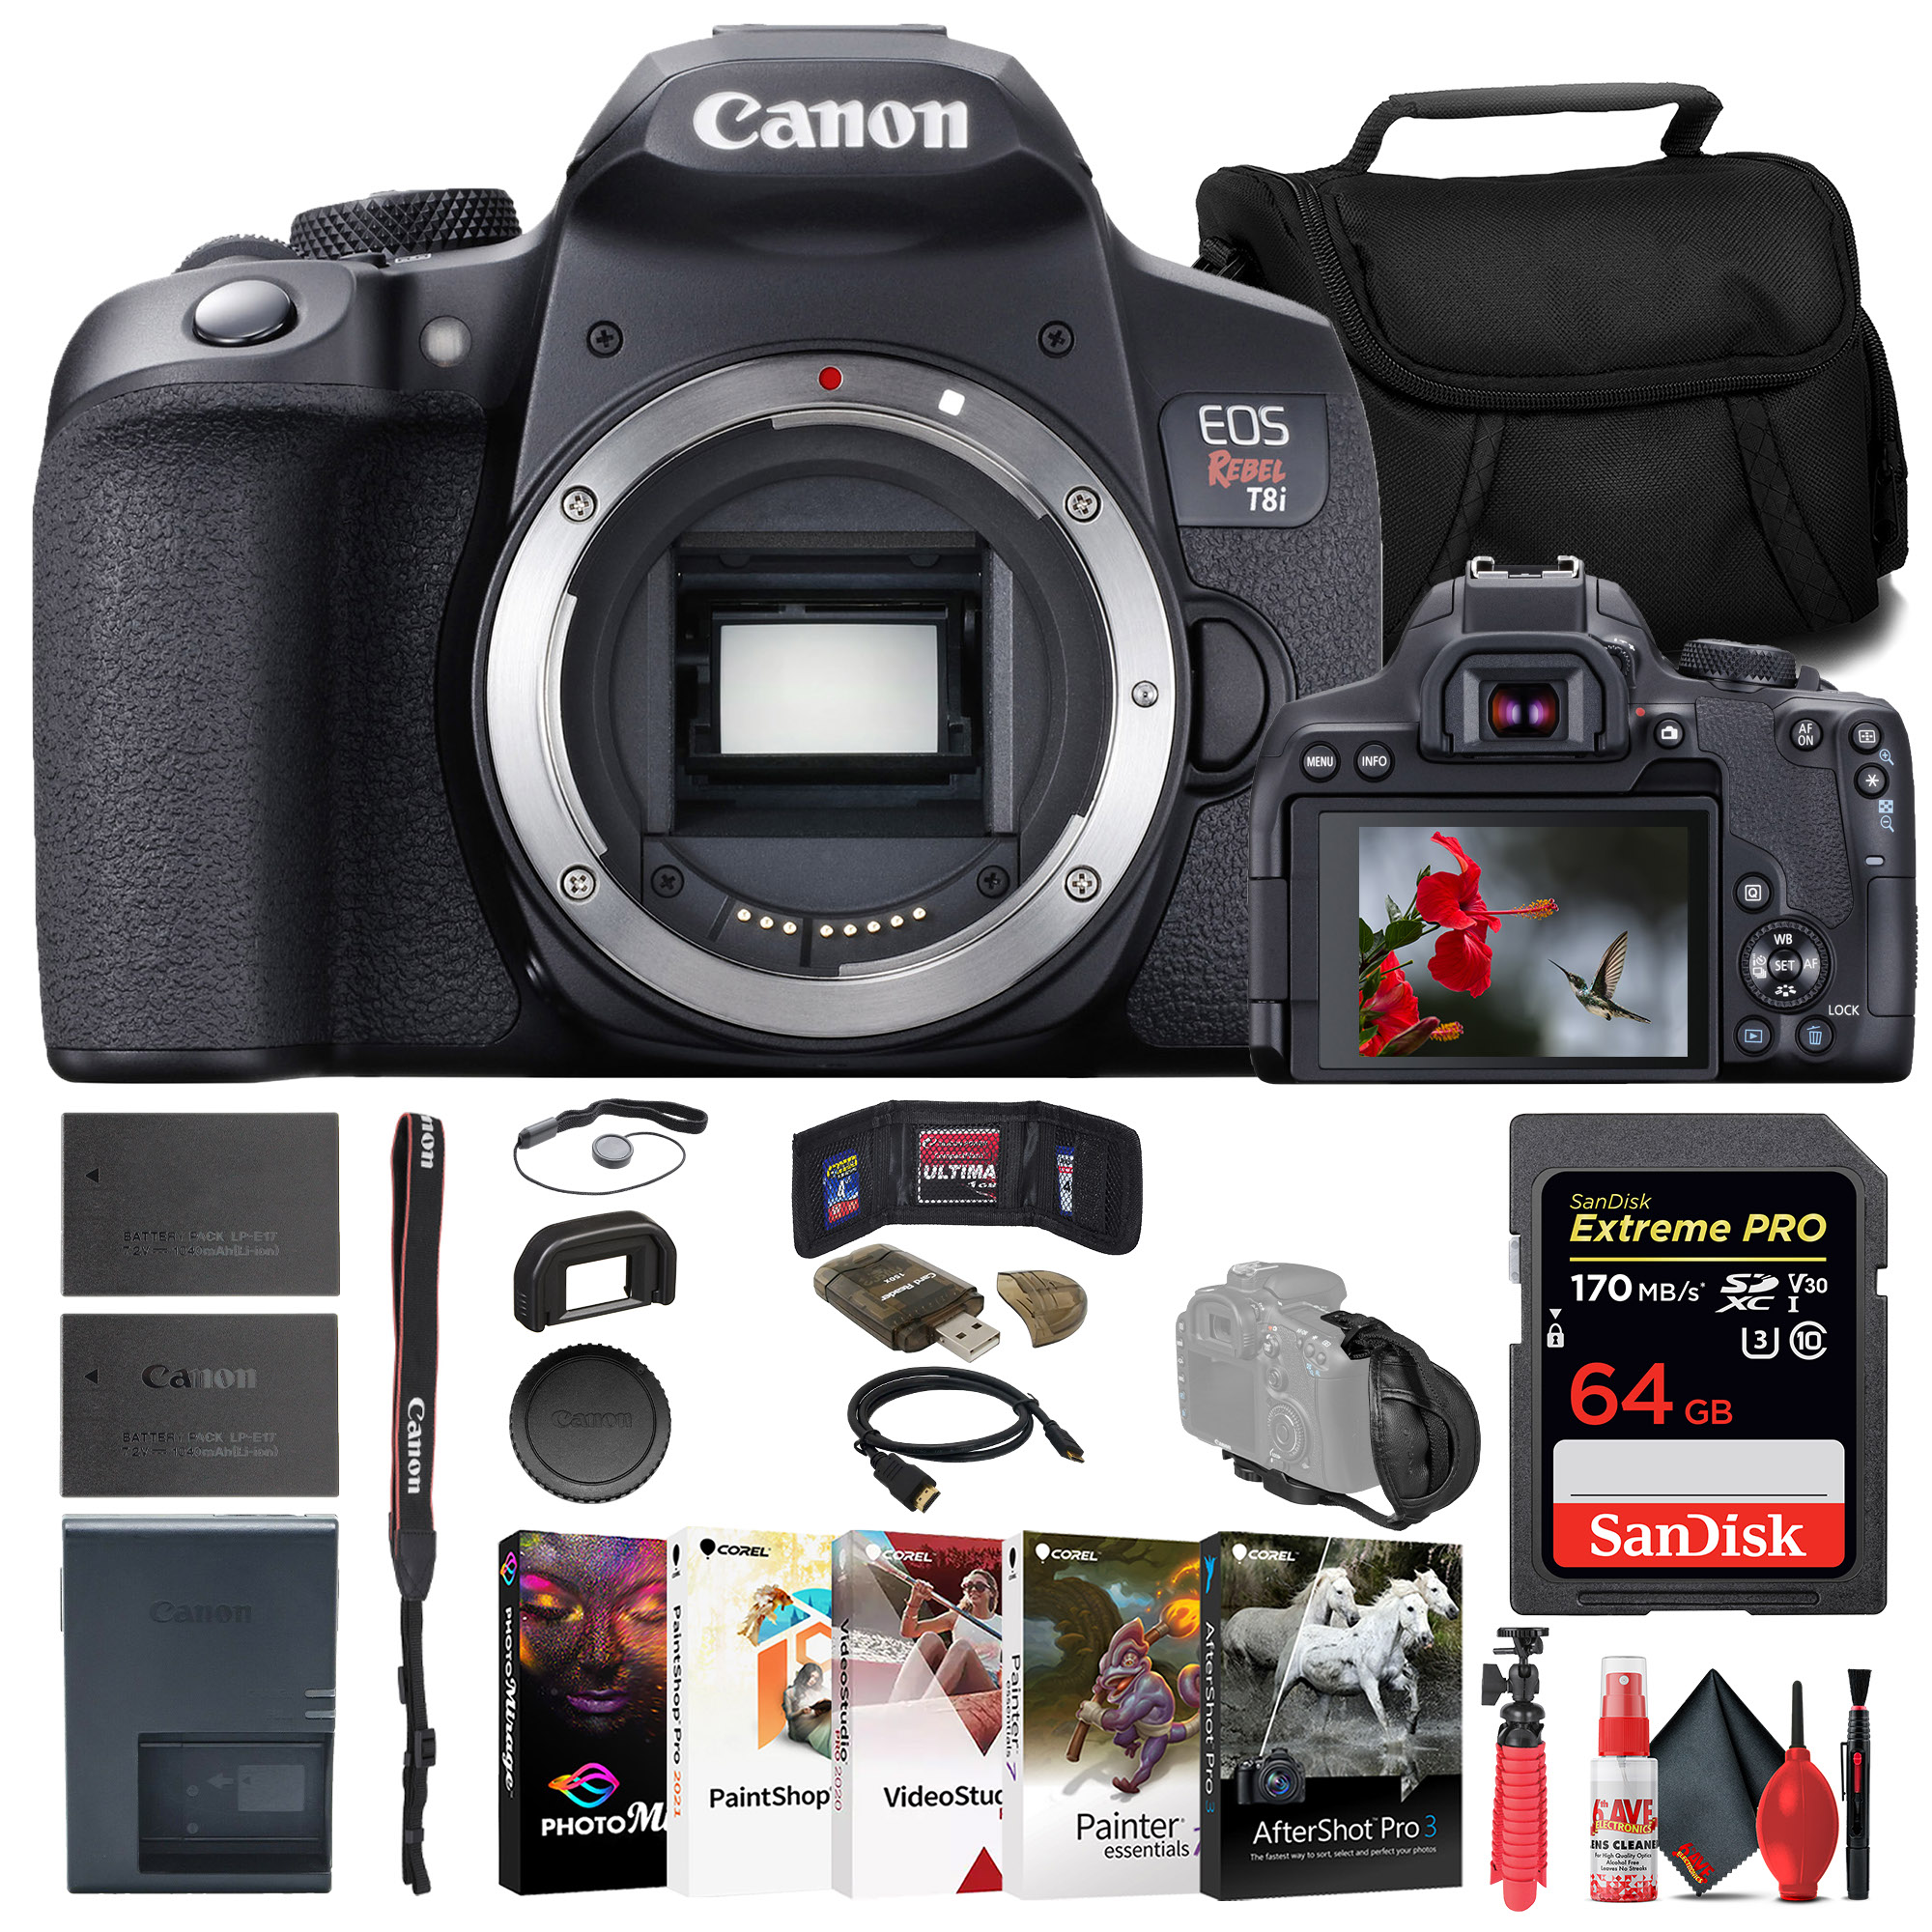 Canon EOS Rebel T8i DSLR Camera (Body Only) (3924C001) + 64GB Memory Card + Charger + LPE17 Battery + Card Reader + Corel Photo Software + Case + Flex Tripod + HDMI Cable + Hand Strap + More - image 1 of 8